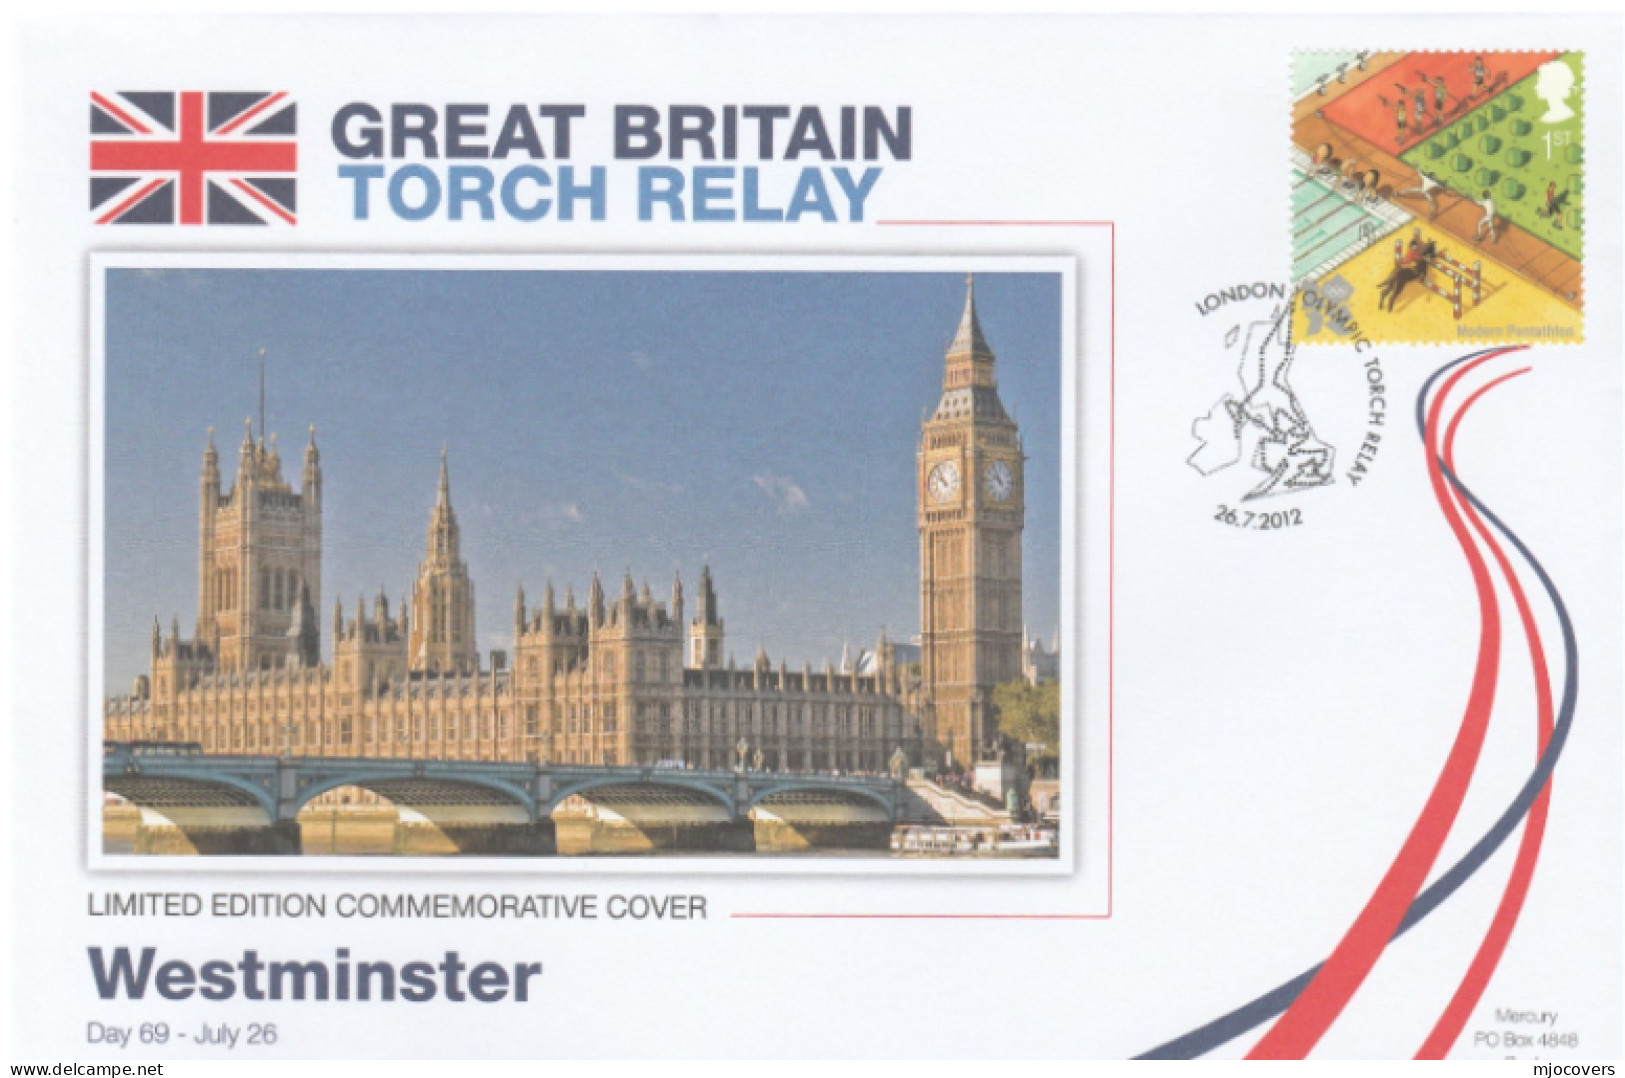 2012 Ltd Edn WESTMINSTER BIG BEN OLYMPICS TORCH Relay COVER London OLYMPIC GAMES Horse Sport GB Parliament CLOCK Stamps - Sommer 2012: London